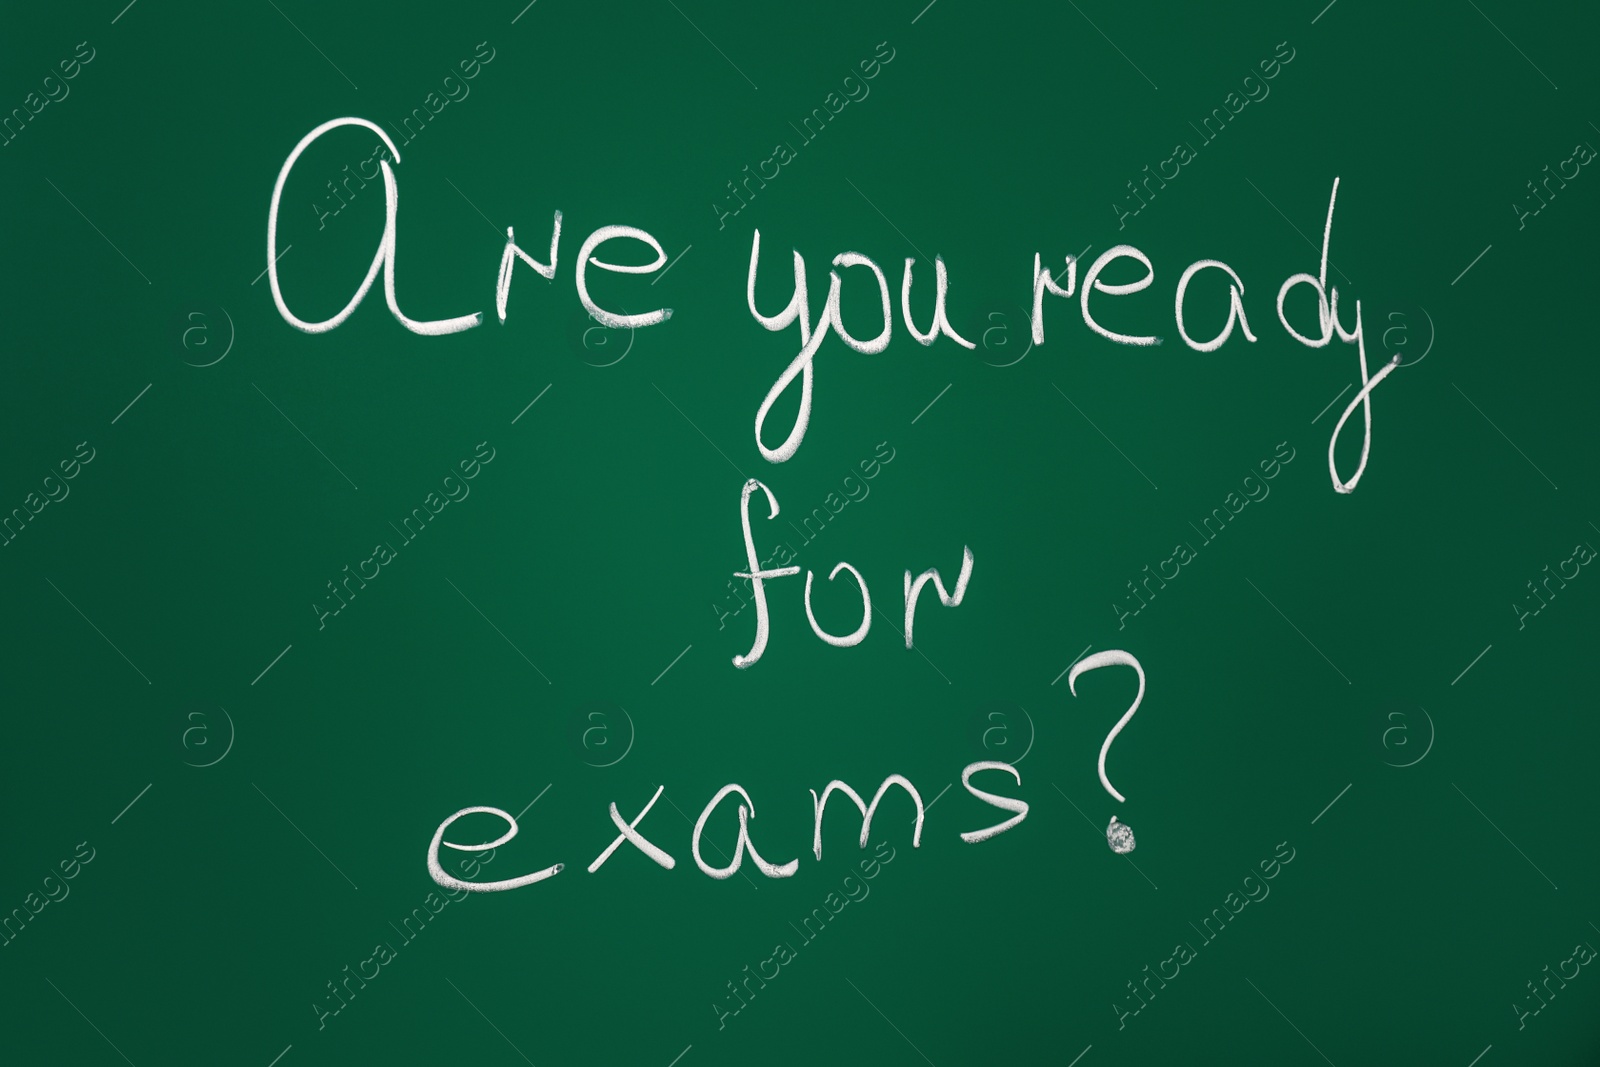 Photo of Green chalkboard with phrase Are You Ready For Exams as background